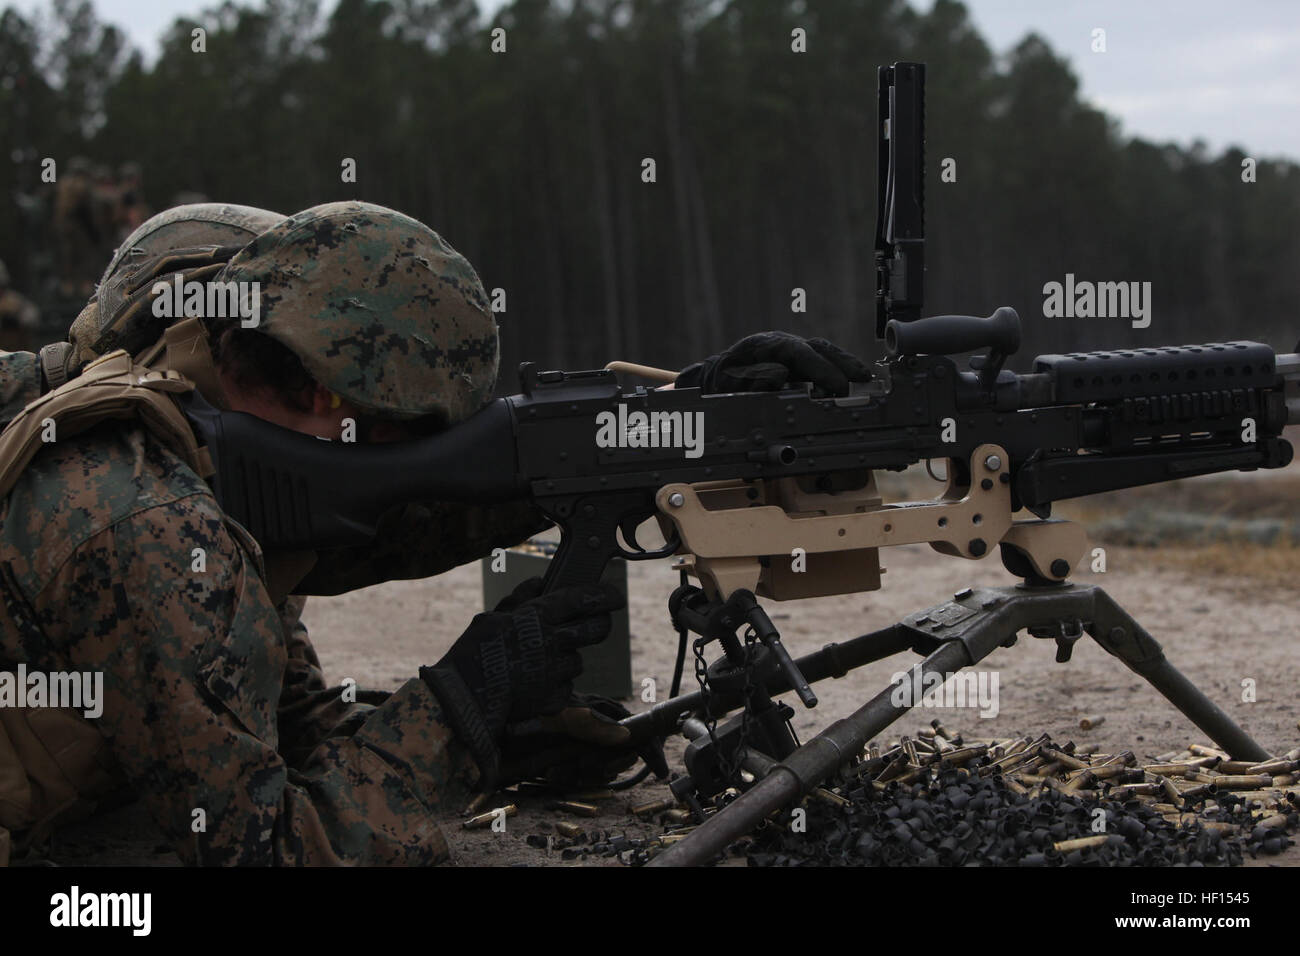 Marines with Bridge Company, 8th Engineer Support Battalion, 2nd Marine Logistics Group reload an M-240 machine gun during a training exercise at a machine gun range aboard Camp Lejeune, N.C., Jan. 30, 2013. Marines practiced correct operations of the weapons, to include loading, firing and taking actions to fix malfunctions. Marines train to build, defend bridges 130130-M-DS159-091 Stock Photo